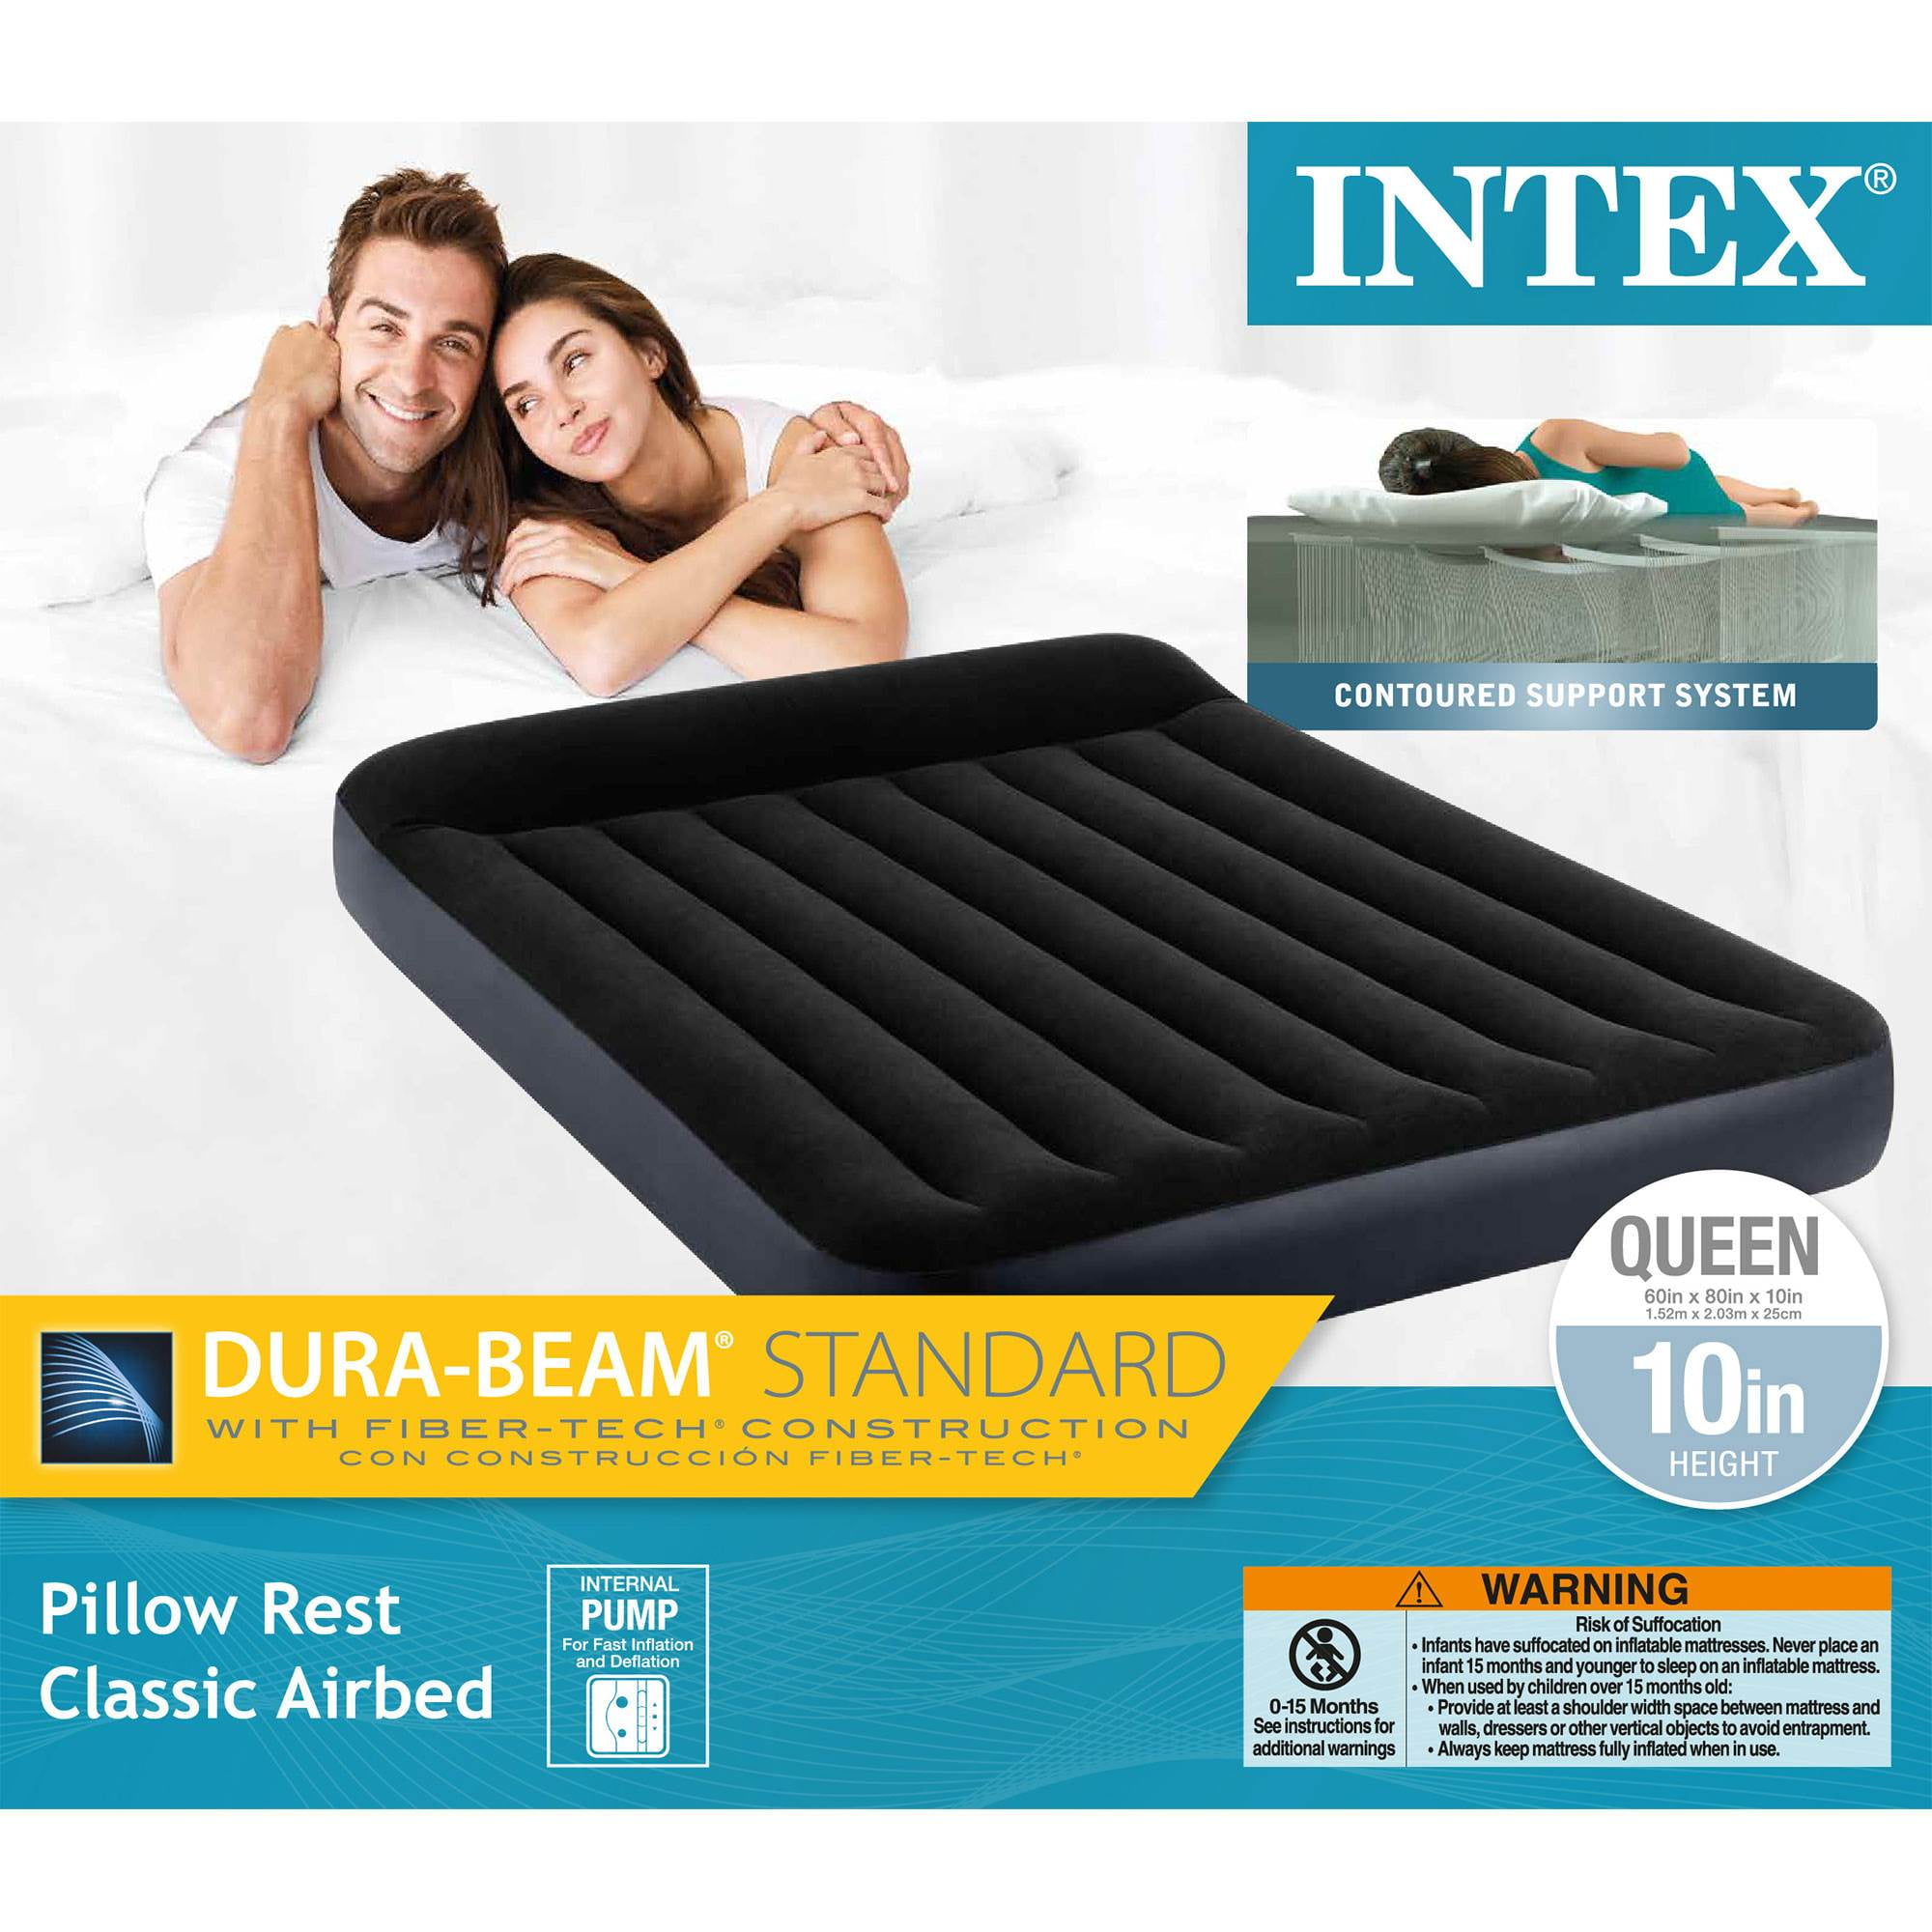 Queen Intex Dura Beam Standard Pillow Rest Classic Airbed with Built-In Pump 